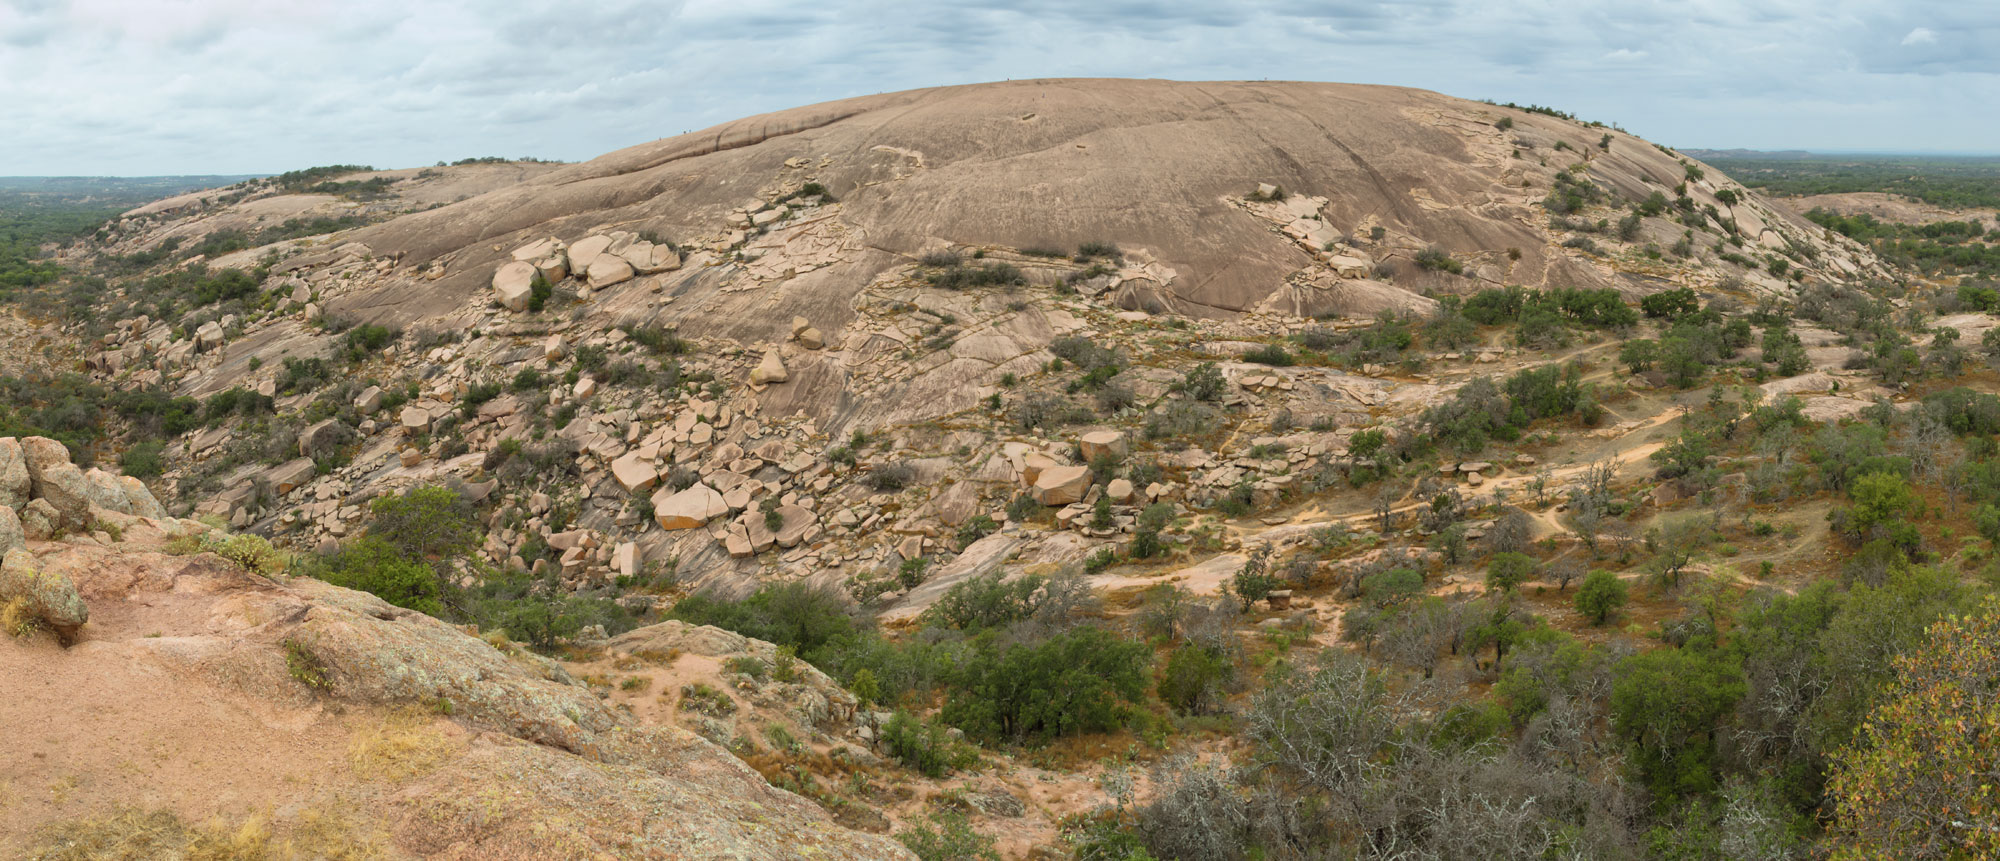 Photo of Enchanted Rock, a Precambrian granitic dome in Texas. The rock is dome-shaped and tan in color. It shows signs of weathering.